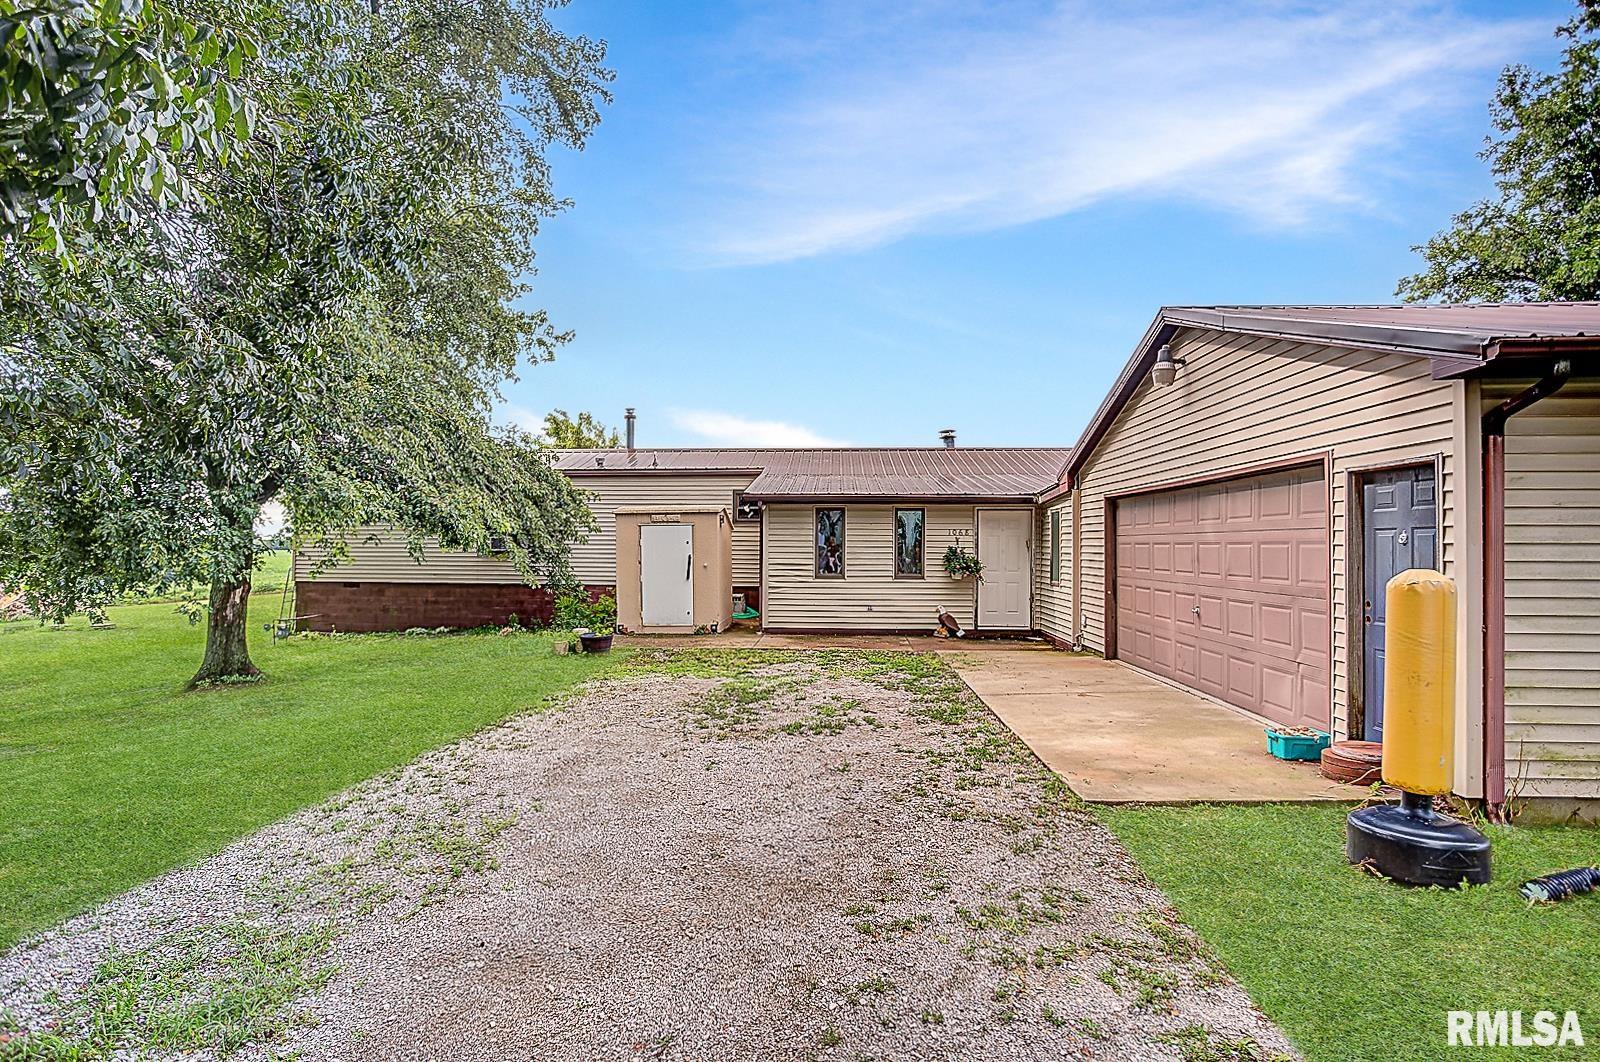 1068 Stacey, Richview, Illinois 62877, ,2 BathroomsBathrooms,Residential,Stacey,EB450209